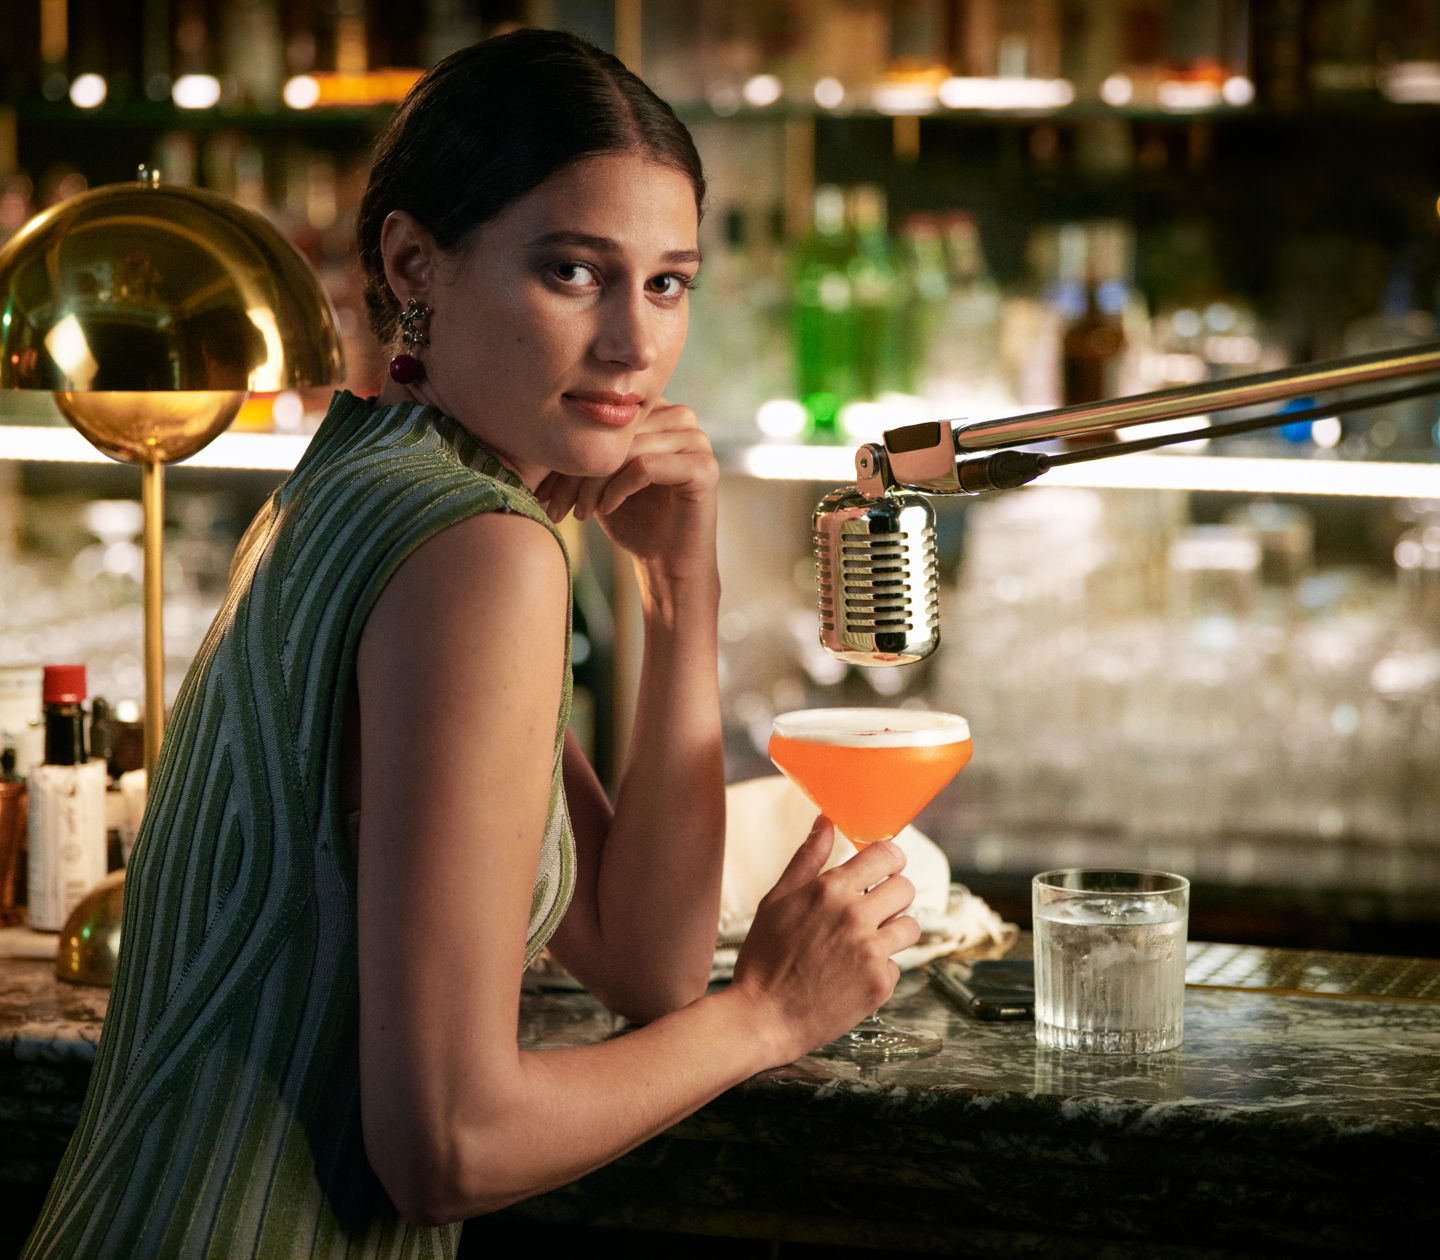 Woman in green dress sitting in bar with orange drink in hand and microphone above